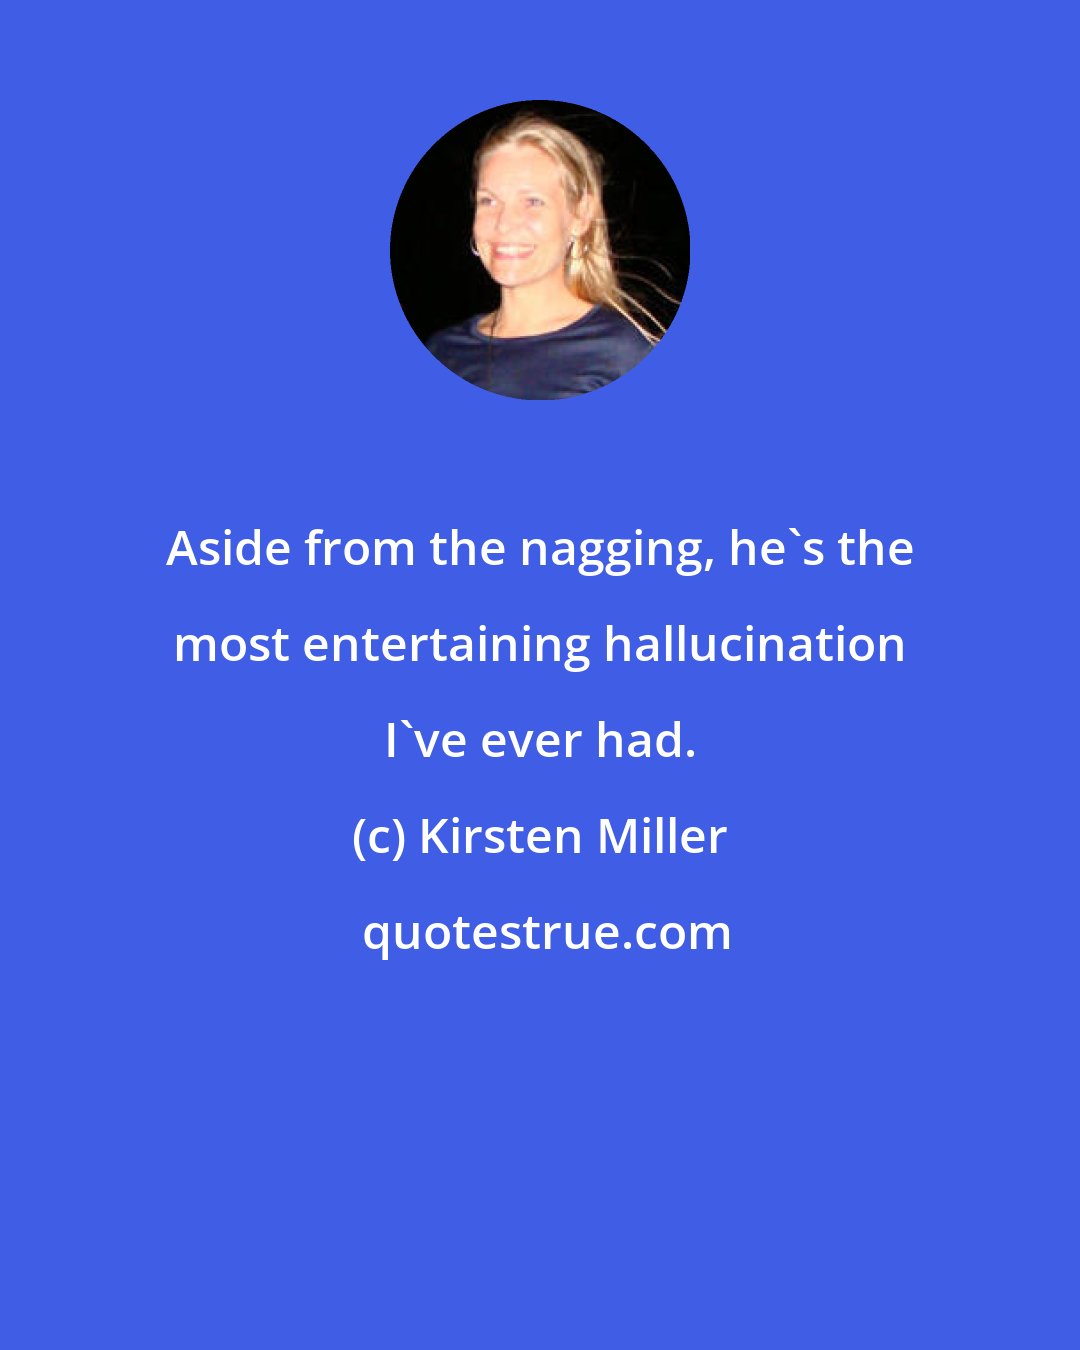 Kirsten Miller: Aside from the nagging, he's the most entertaining hallucination I've ever had.